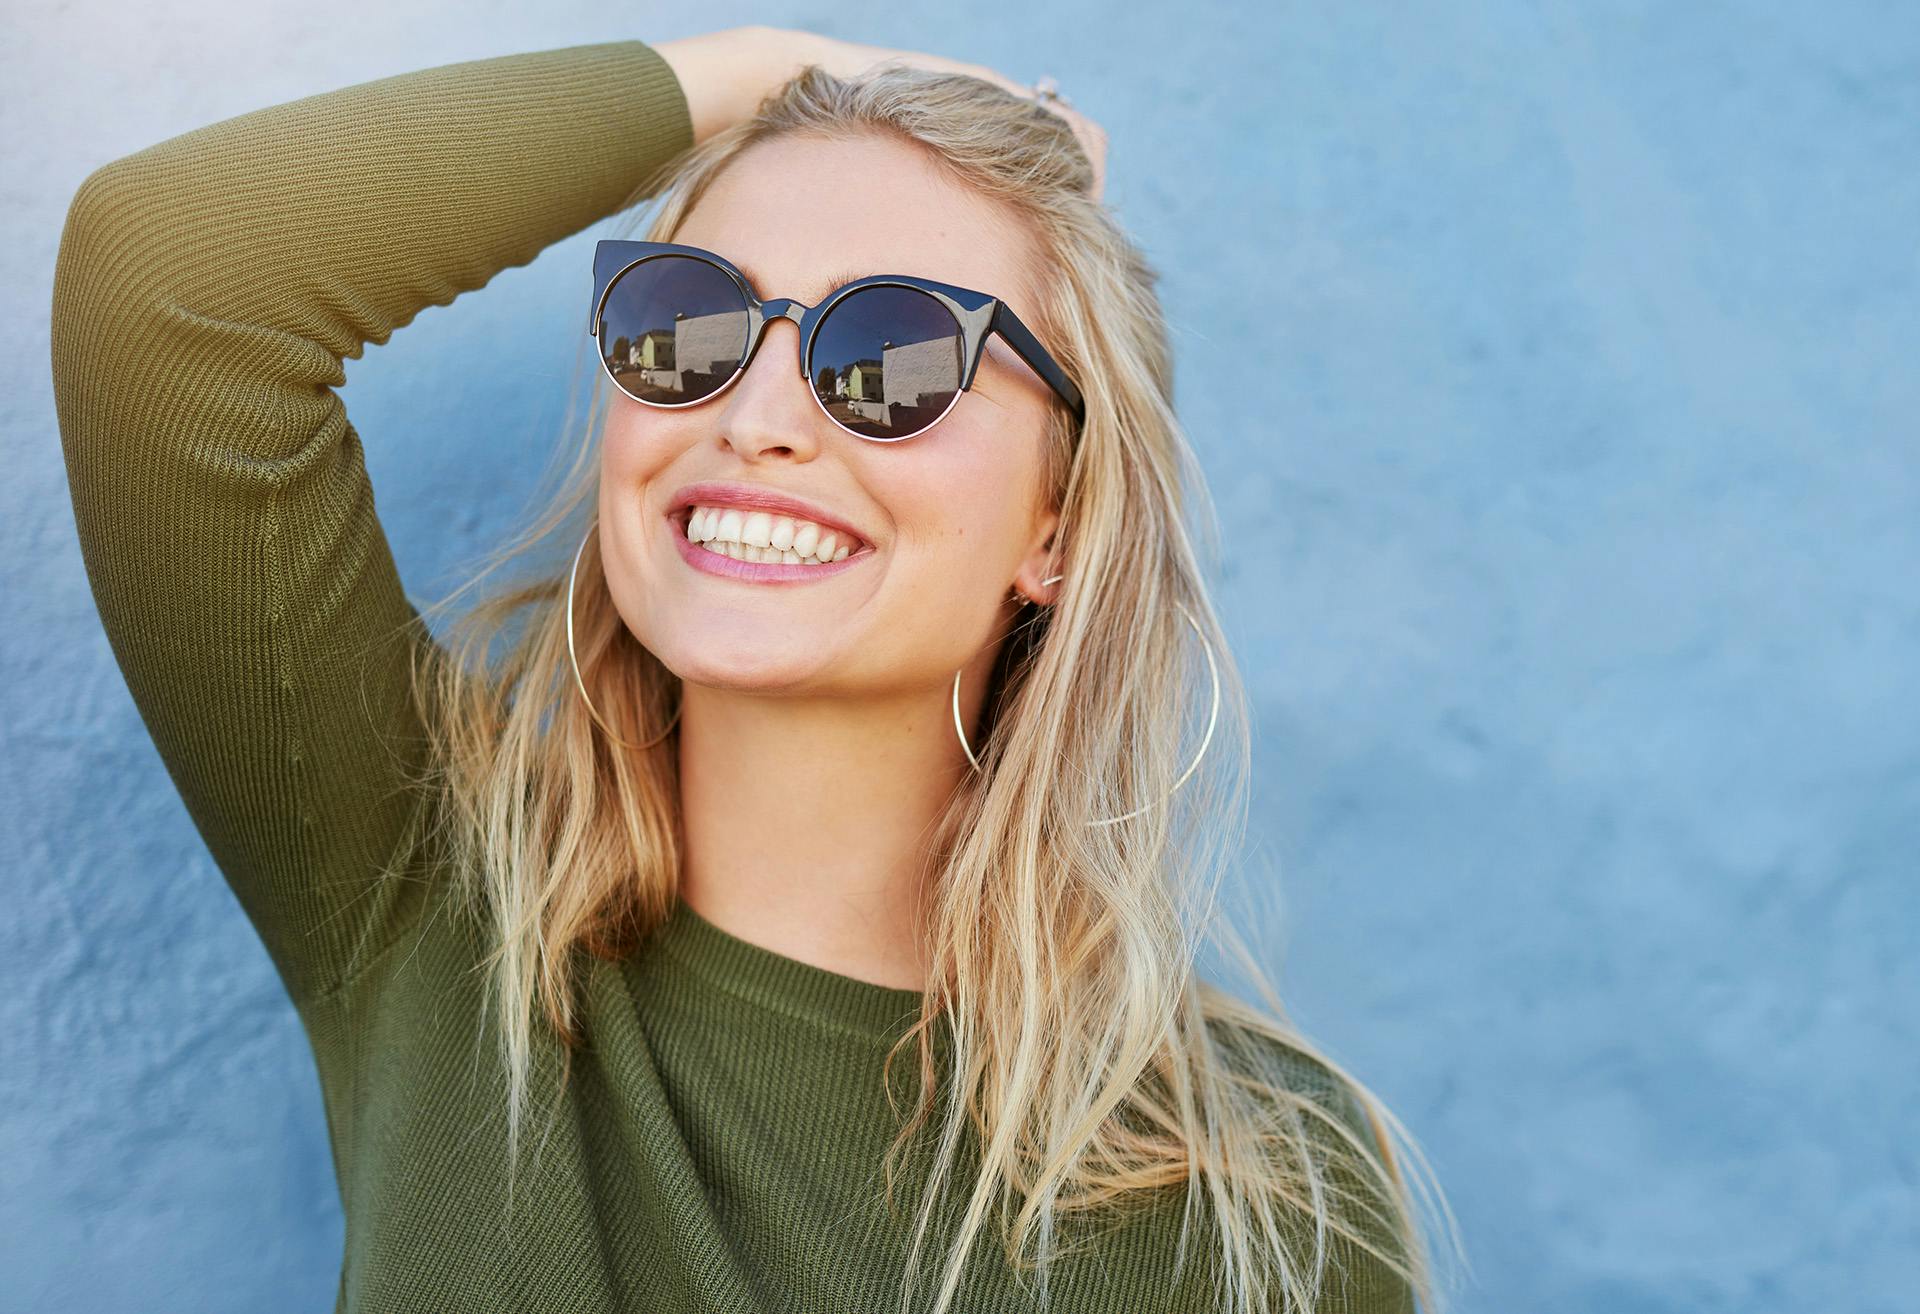 Woman with sunglasses on, smiling